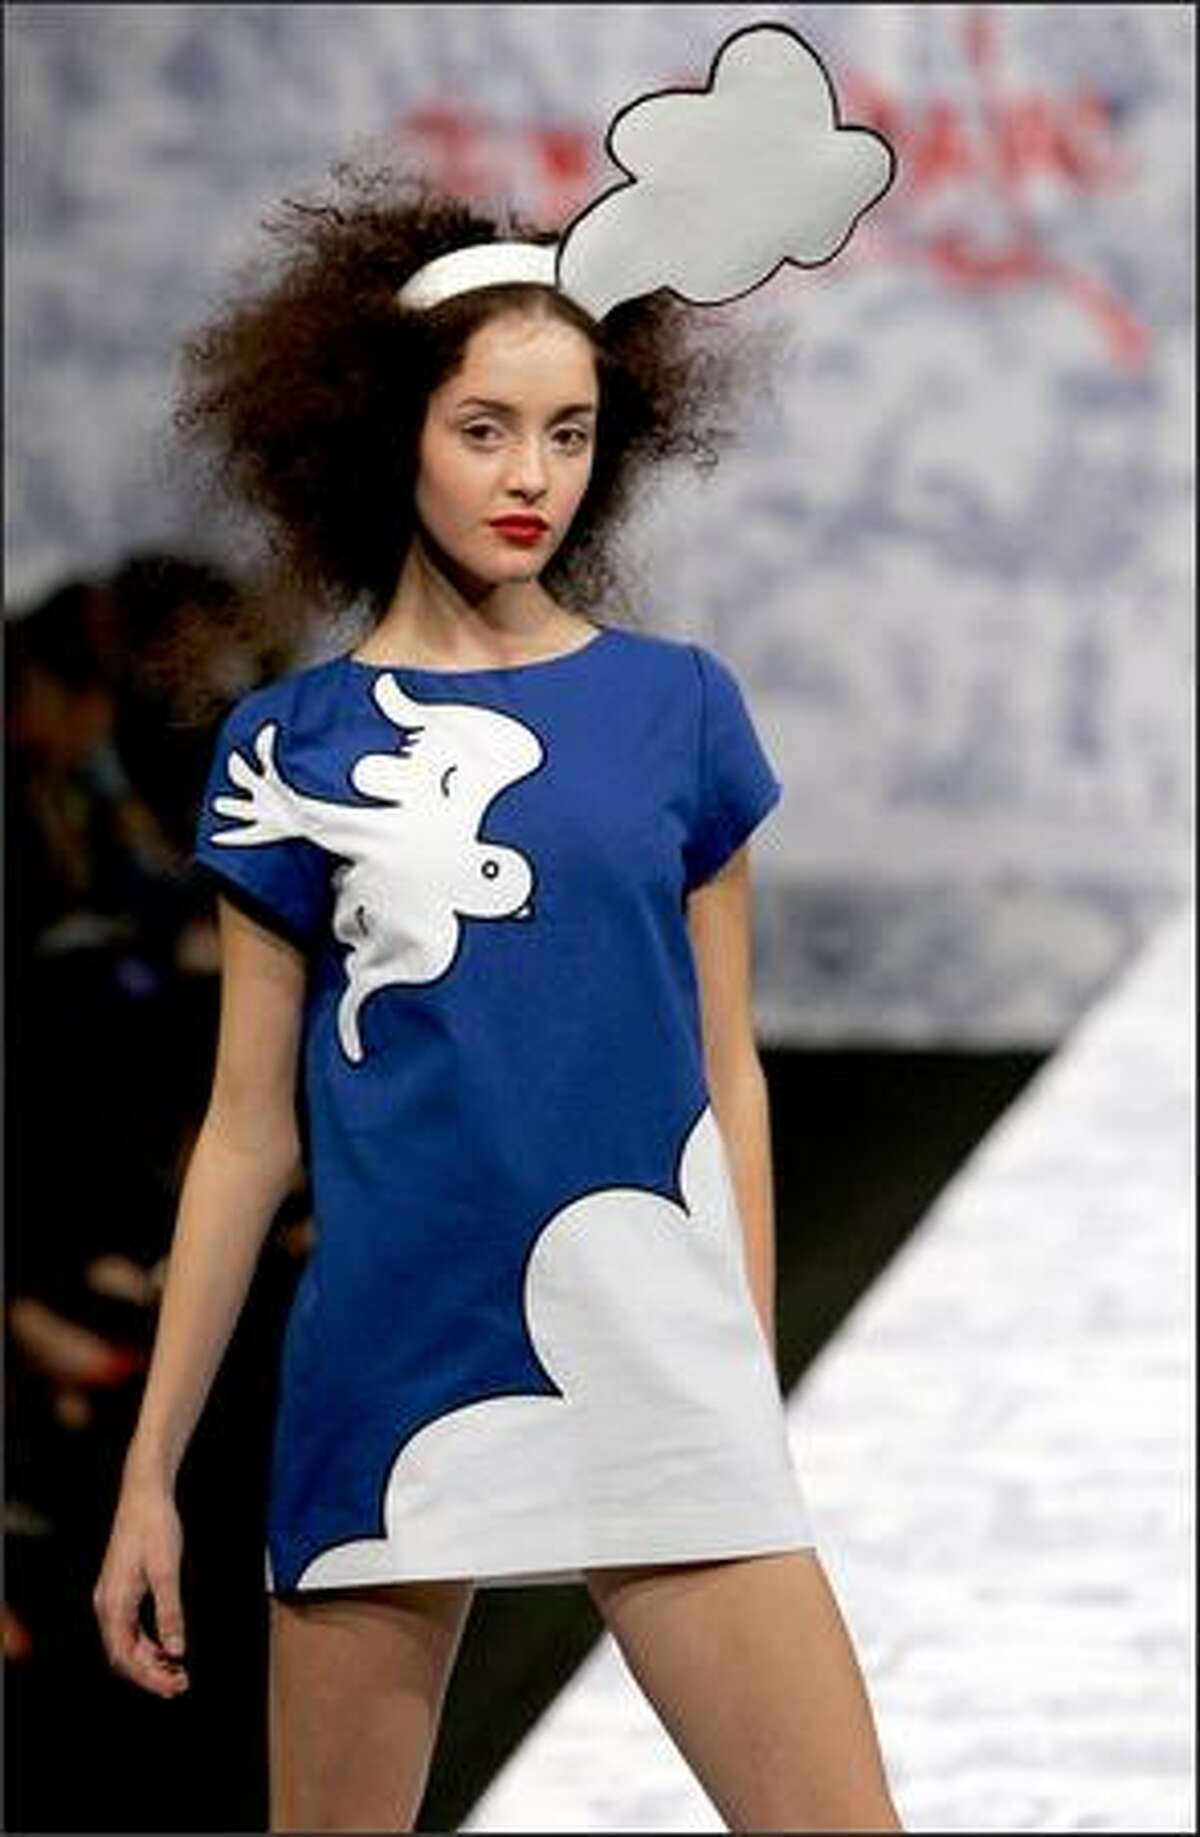 A model presents a creation designed by French fashion designer Jean-Charles de Castelbajac during the presentation of his Spring-summer 2007 ready-to-wear collection, Friday Oct. 6, 2006 in Paris. (AP Photo/Jacques Brinon)